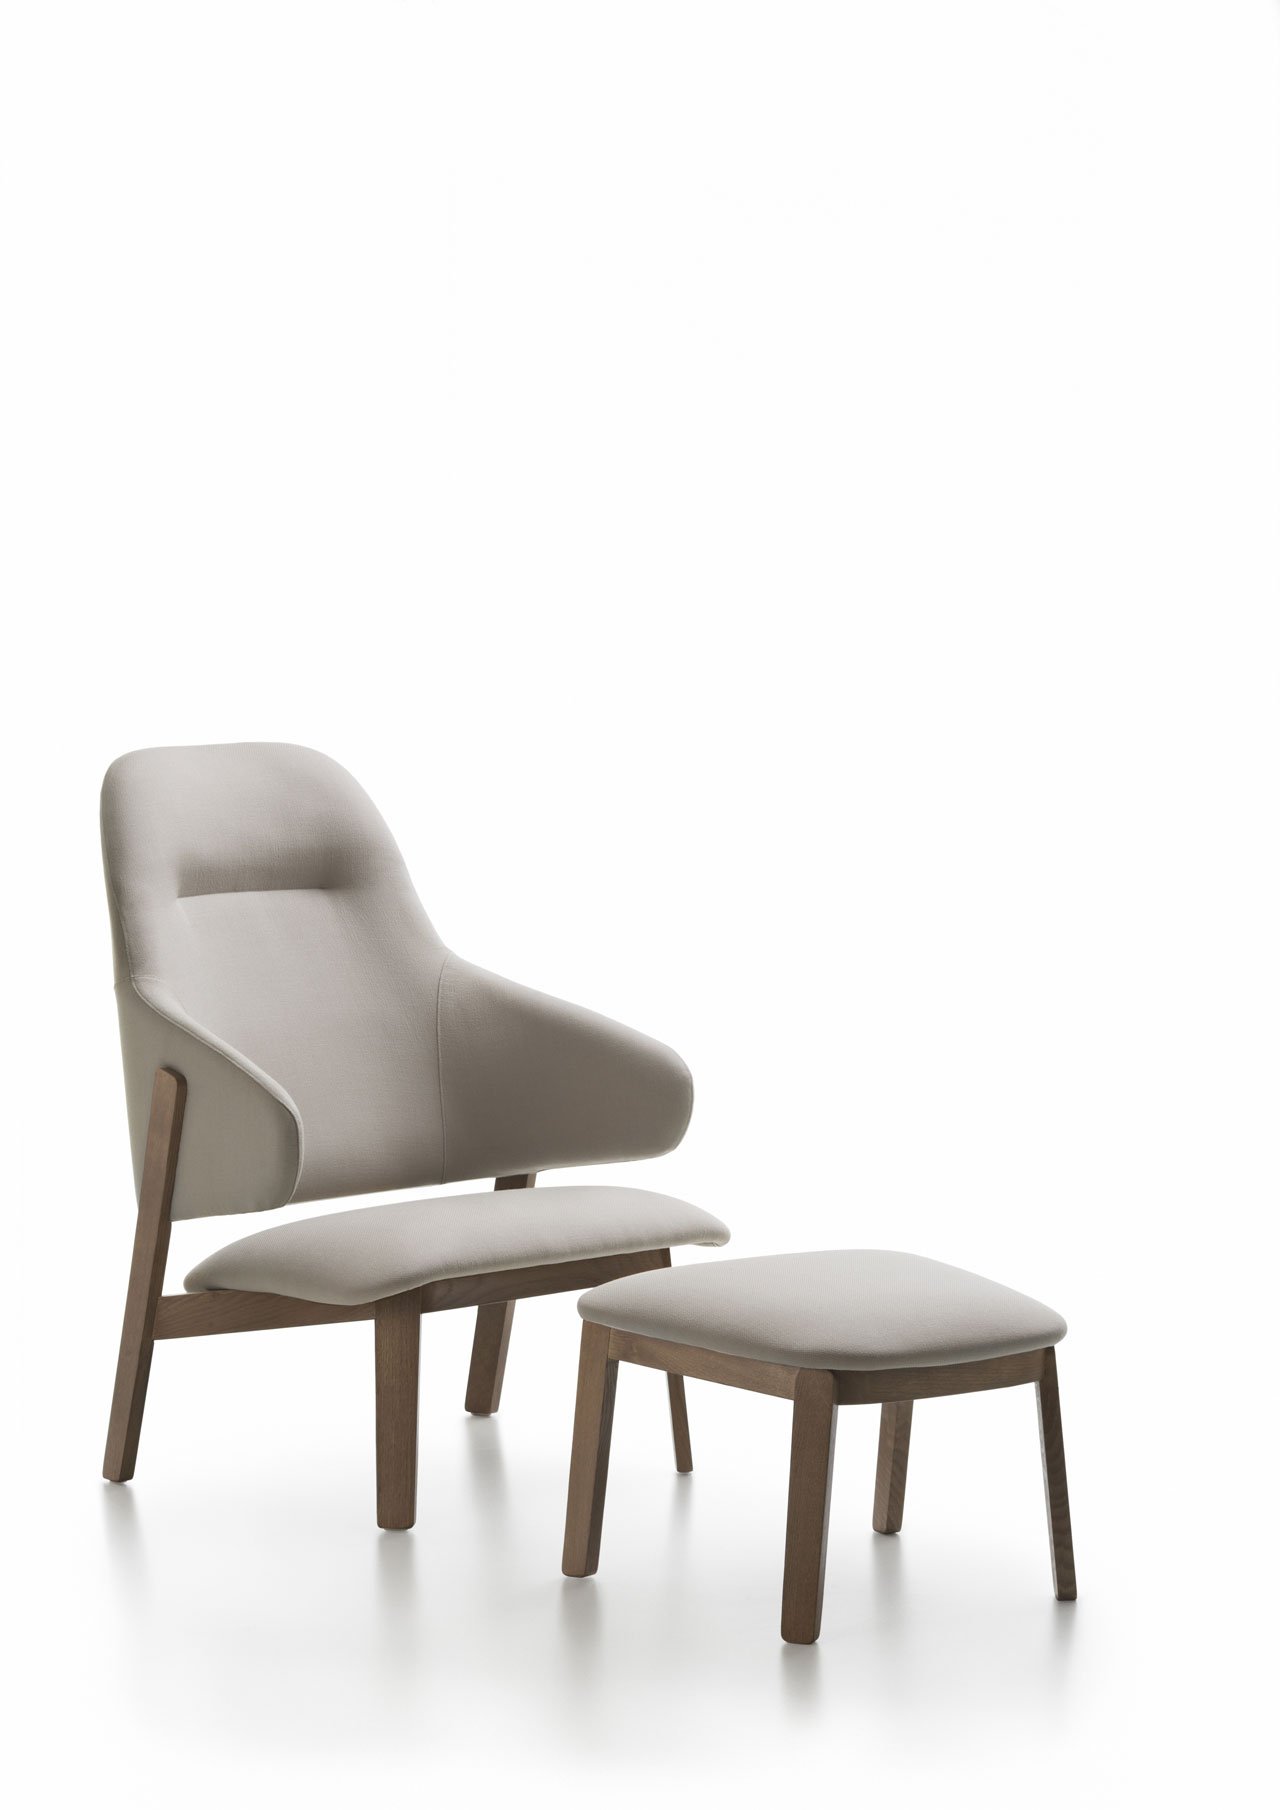 Wolfgang Lounge with High Back by Luca Nichetto for Fornasarig.